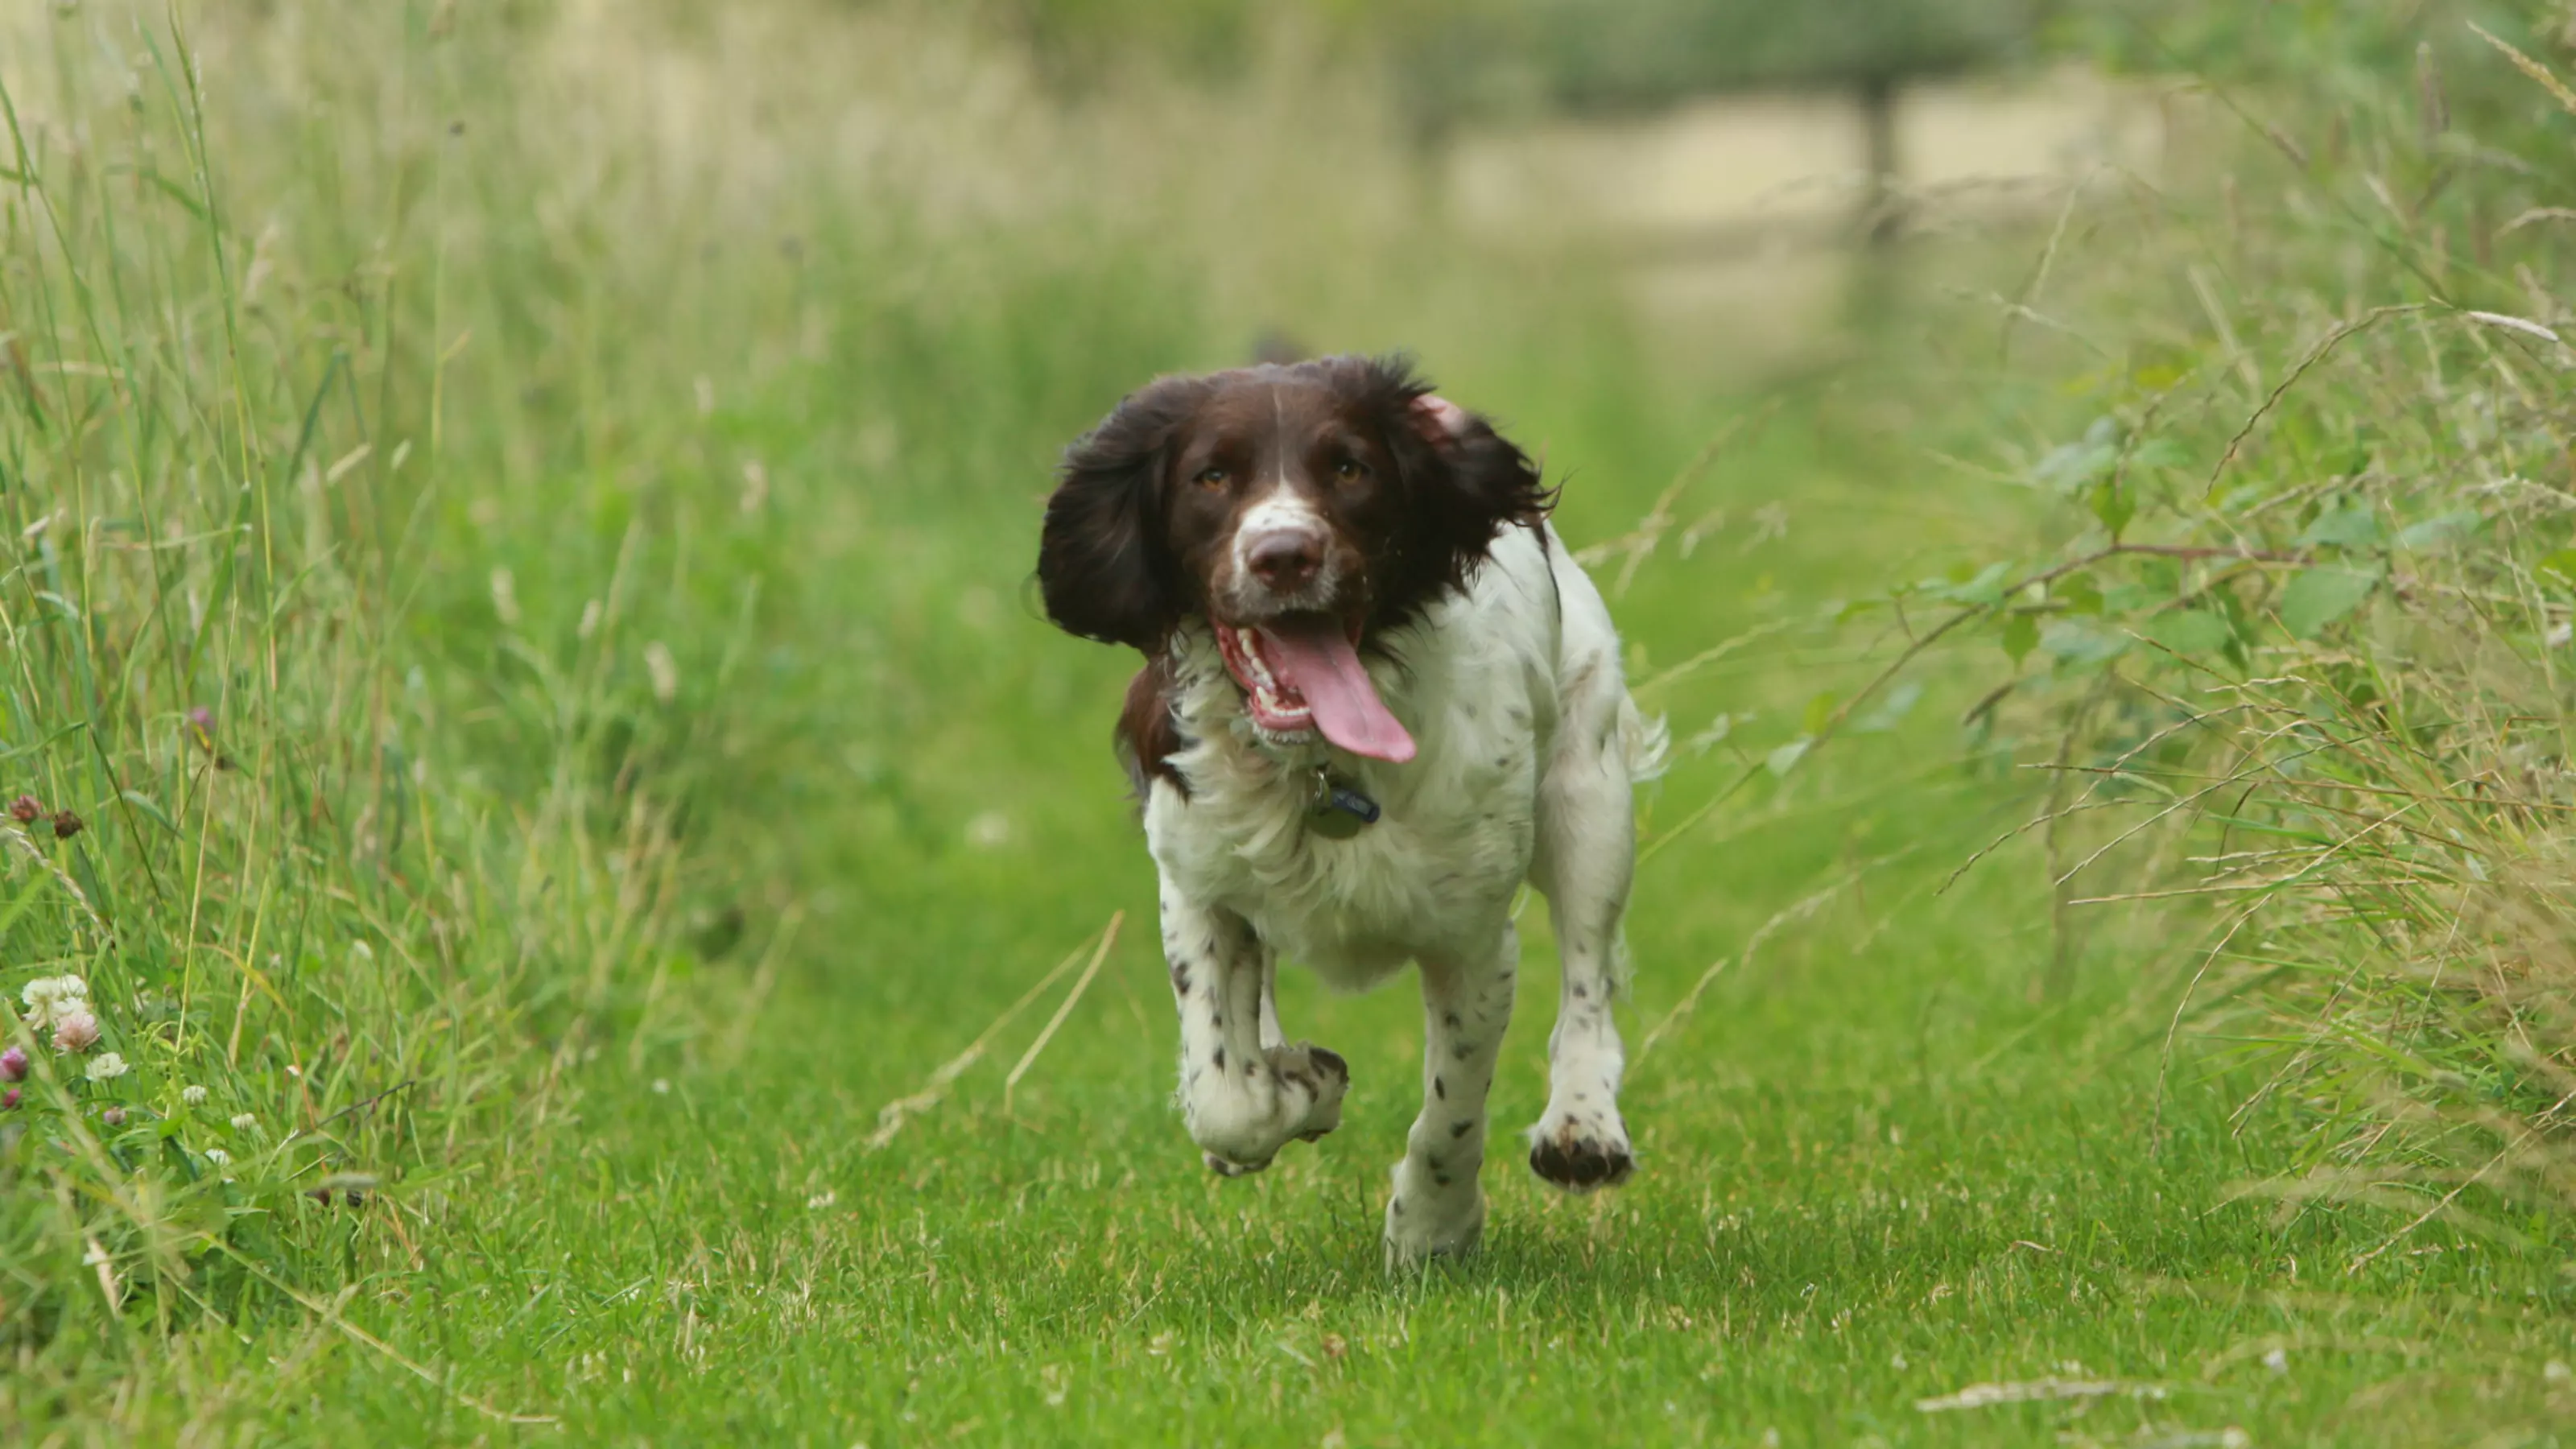 A brown and white spaniel dog running through a grassy field with its tongue out